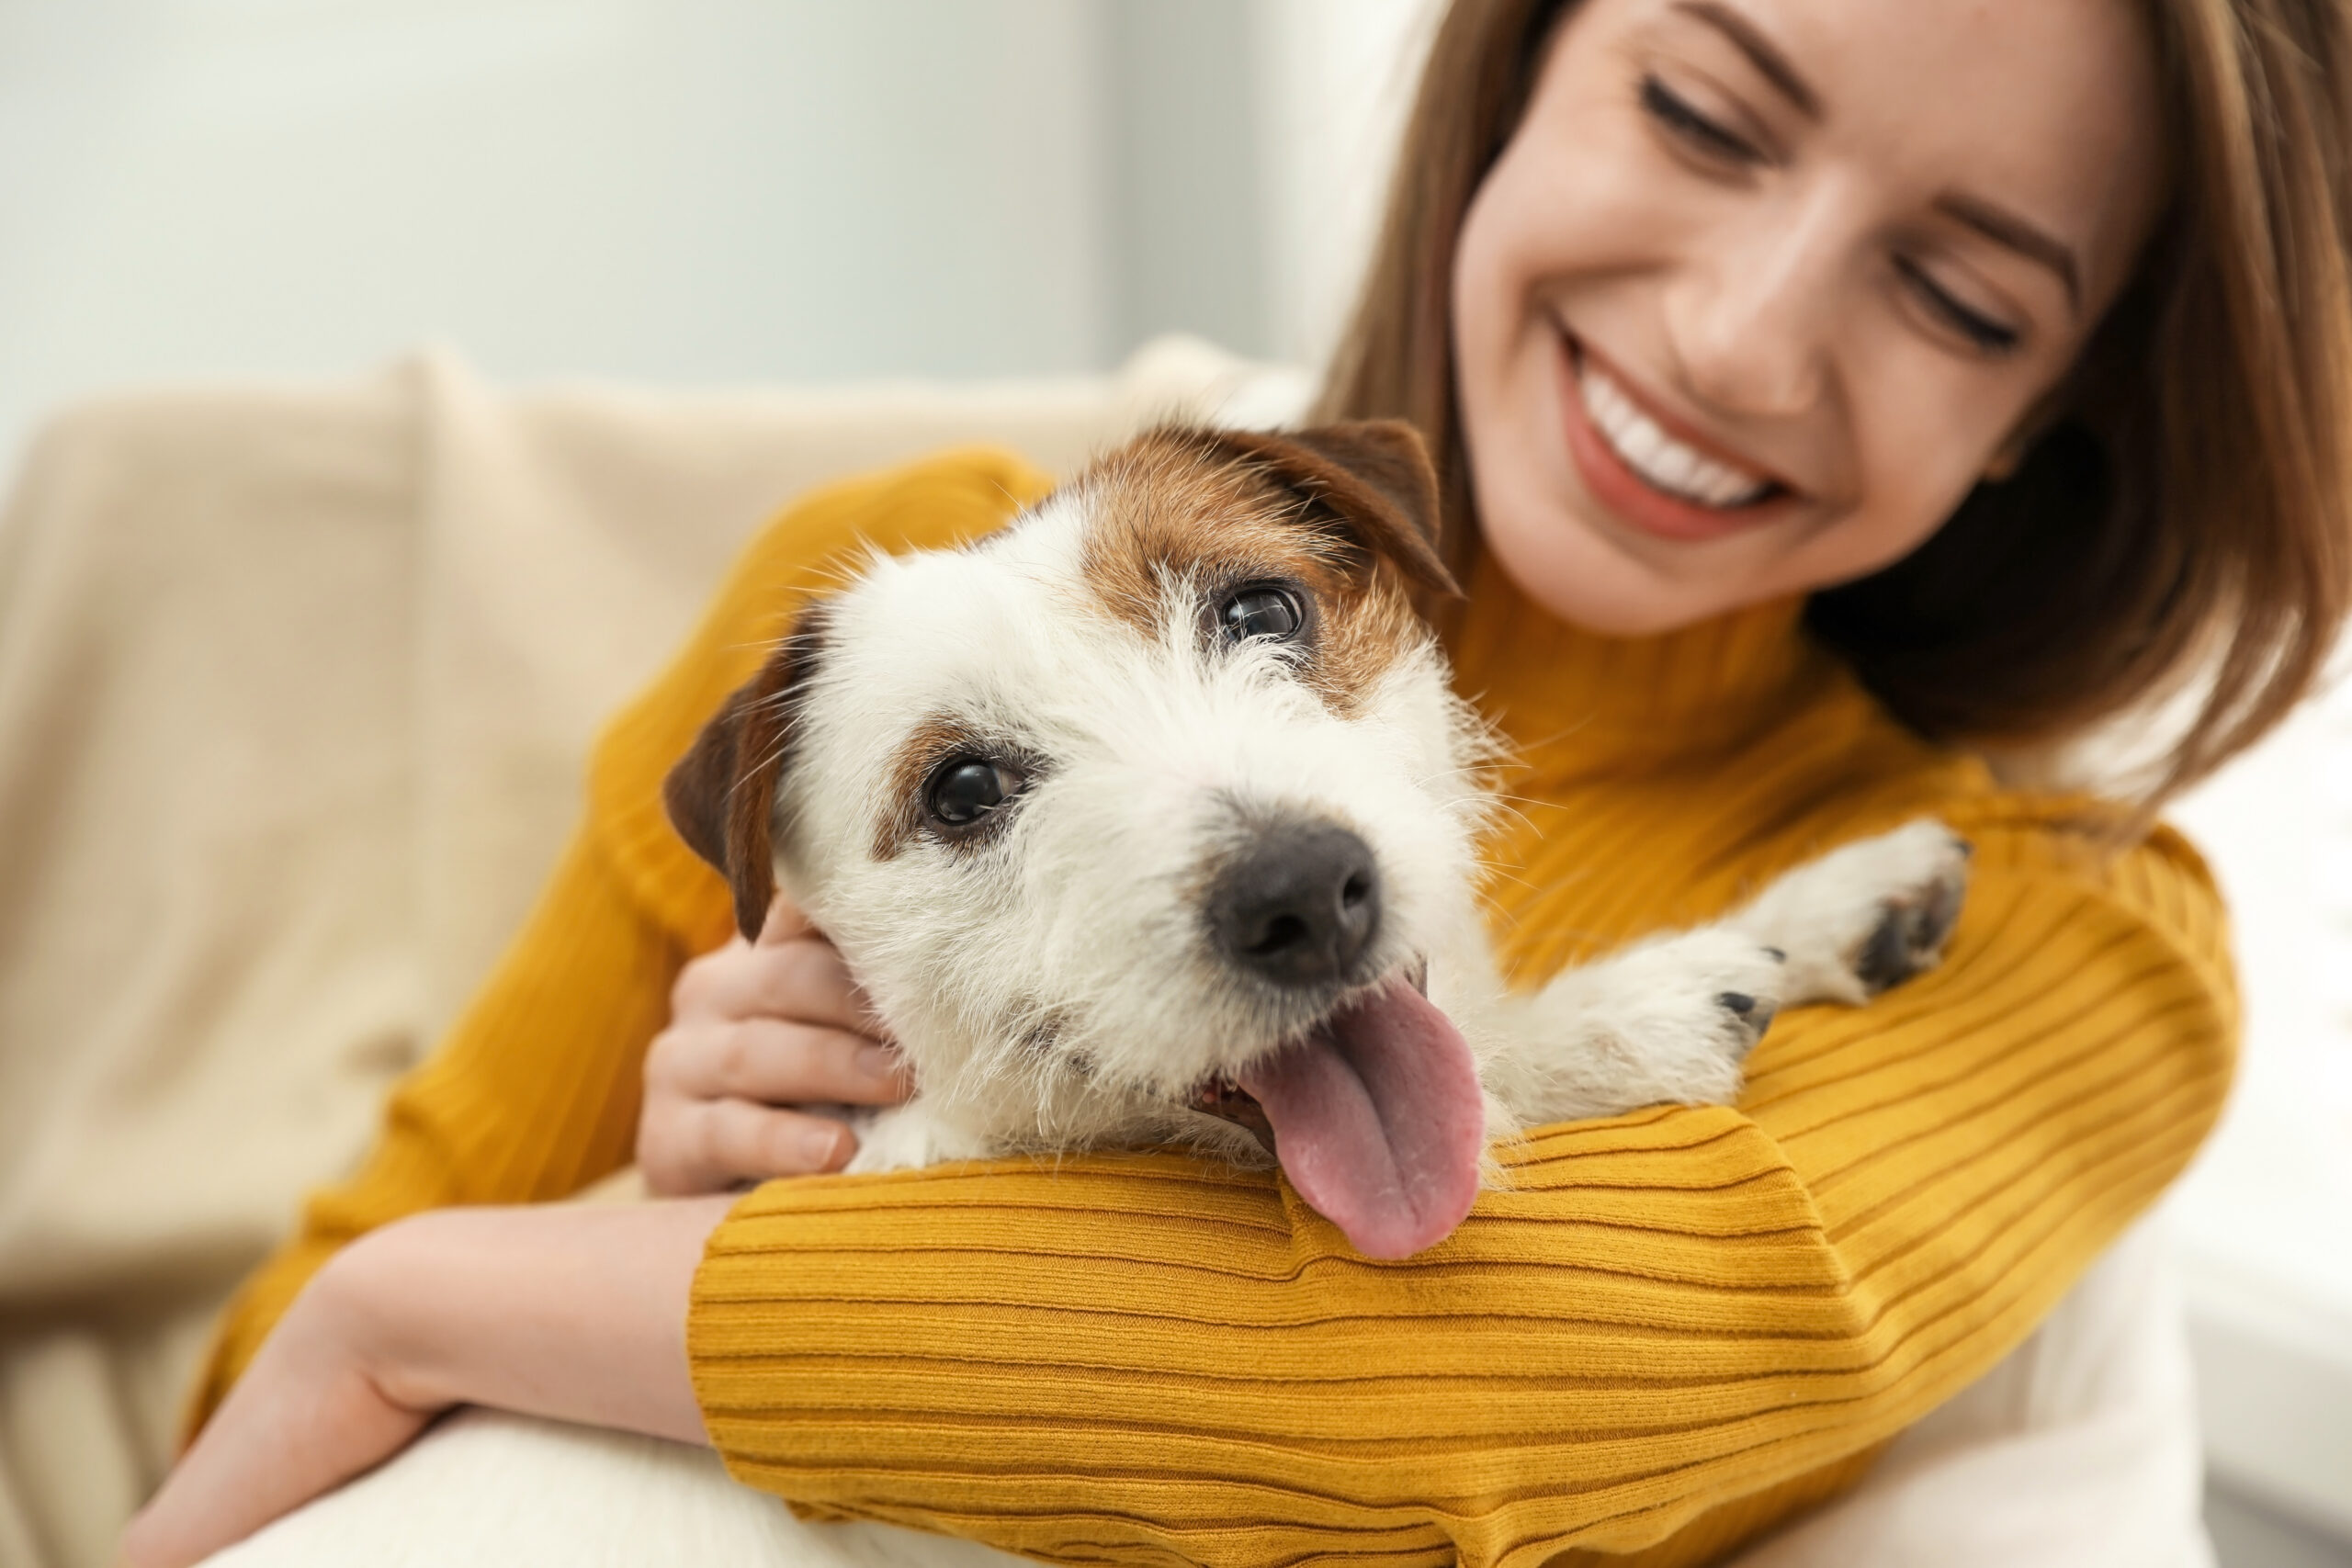 Your Adult Dog: What to Expect at 1-2 Years